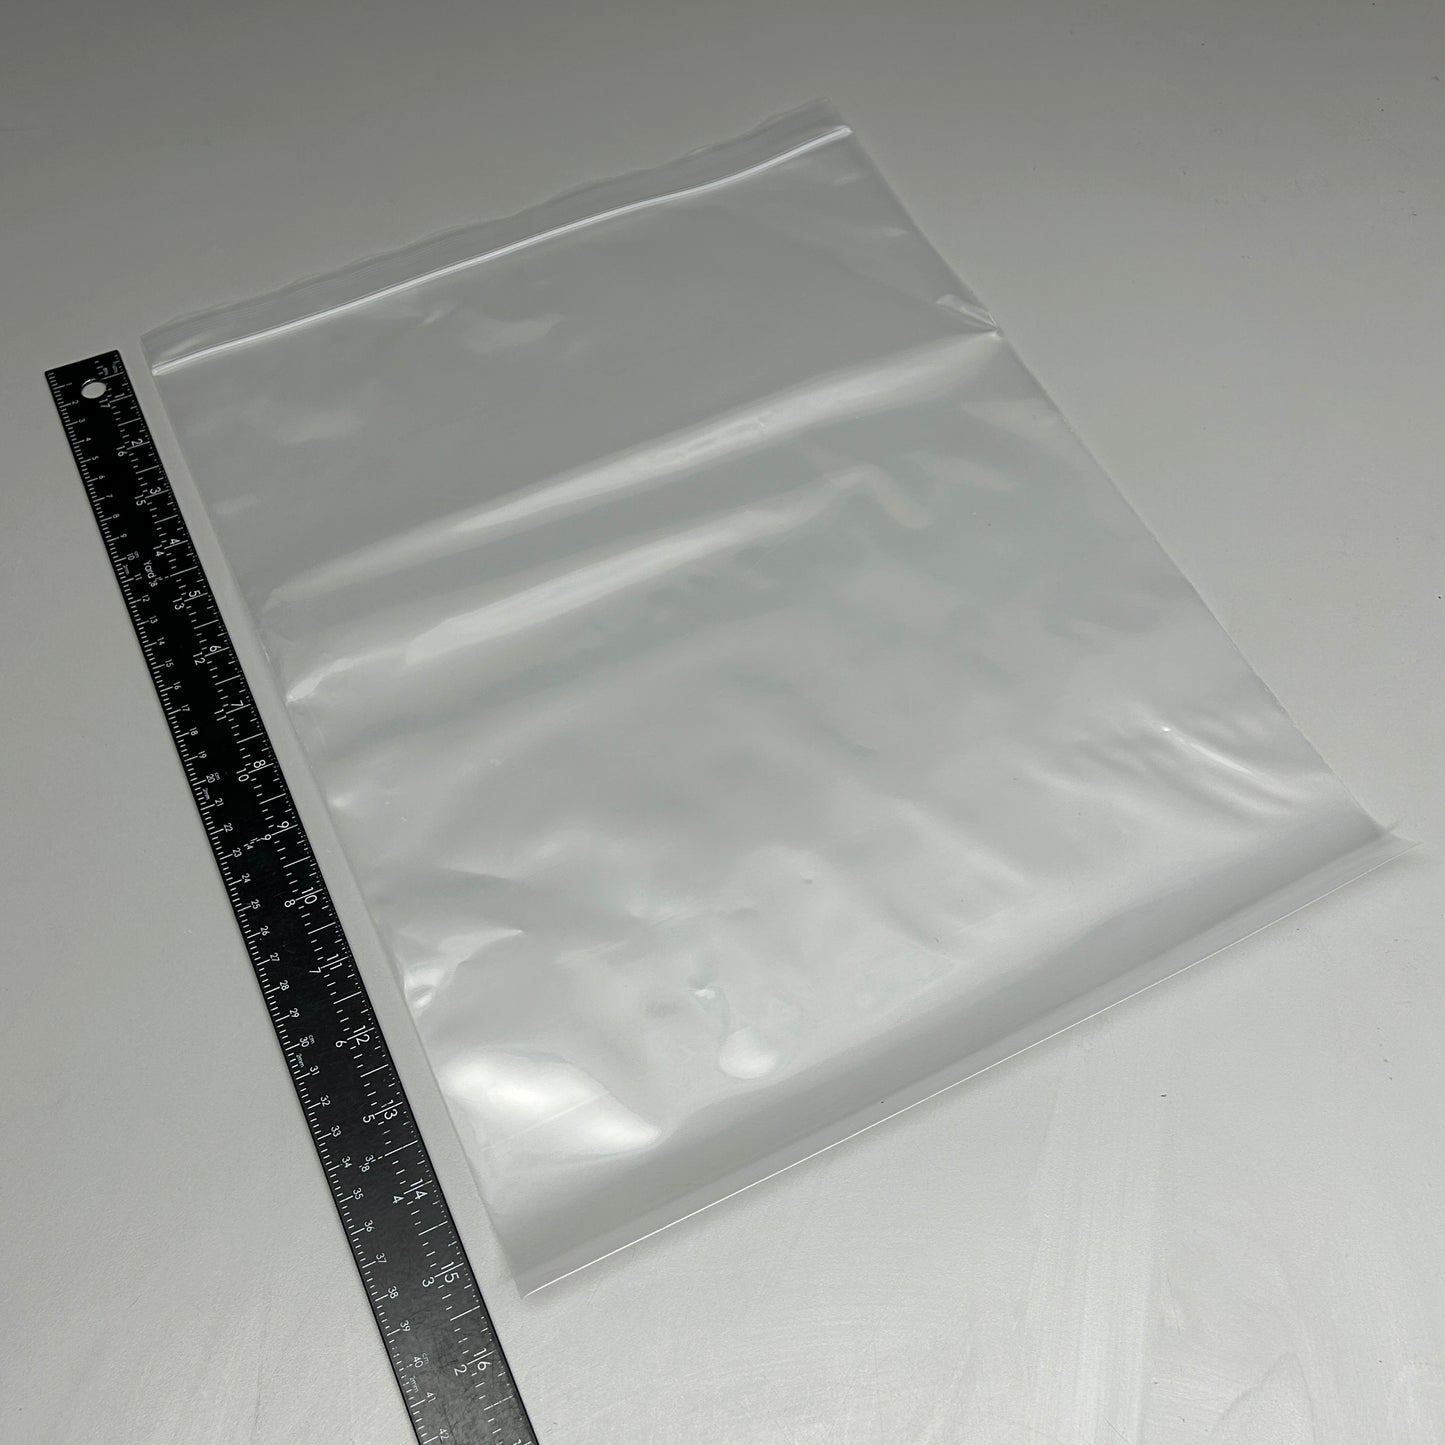 500 BAGS! (5x100ct) GGS 2 GALLON Standard Weight Seal Top Freezer Bags (Approx 13”x15”)